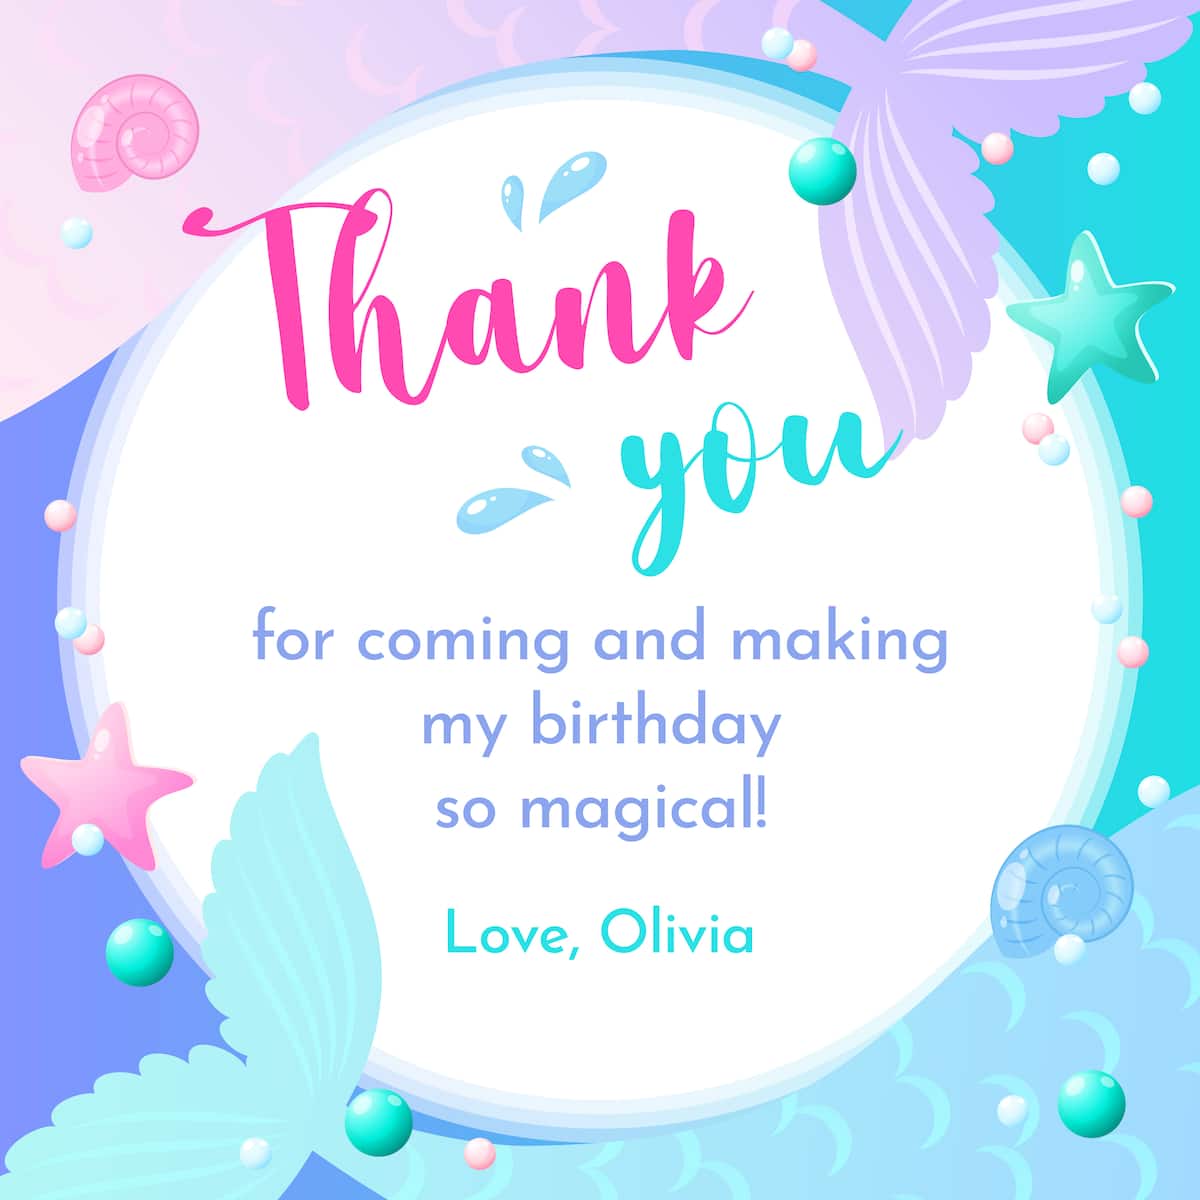 Thank You Notes and Messages for Birthday Wishes - Holidappy